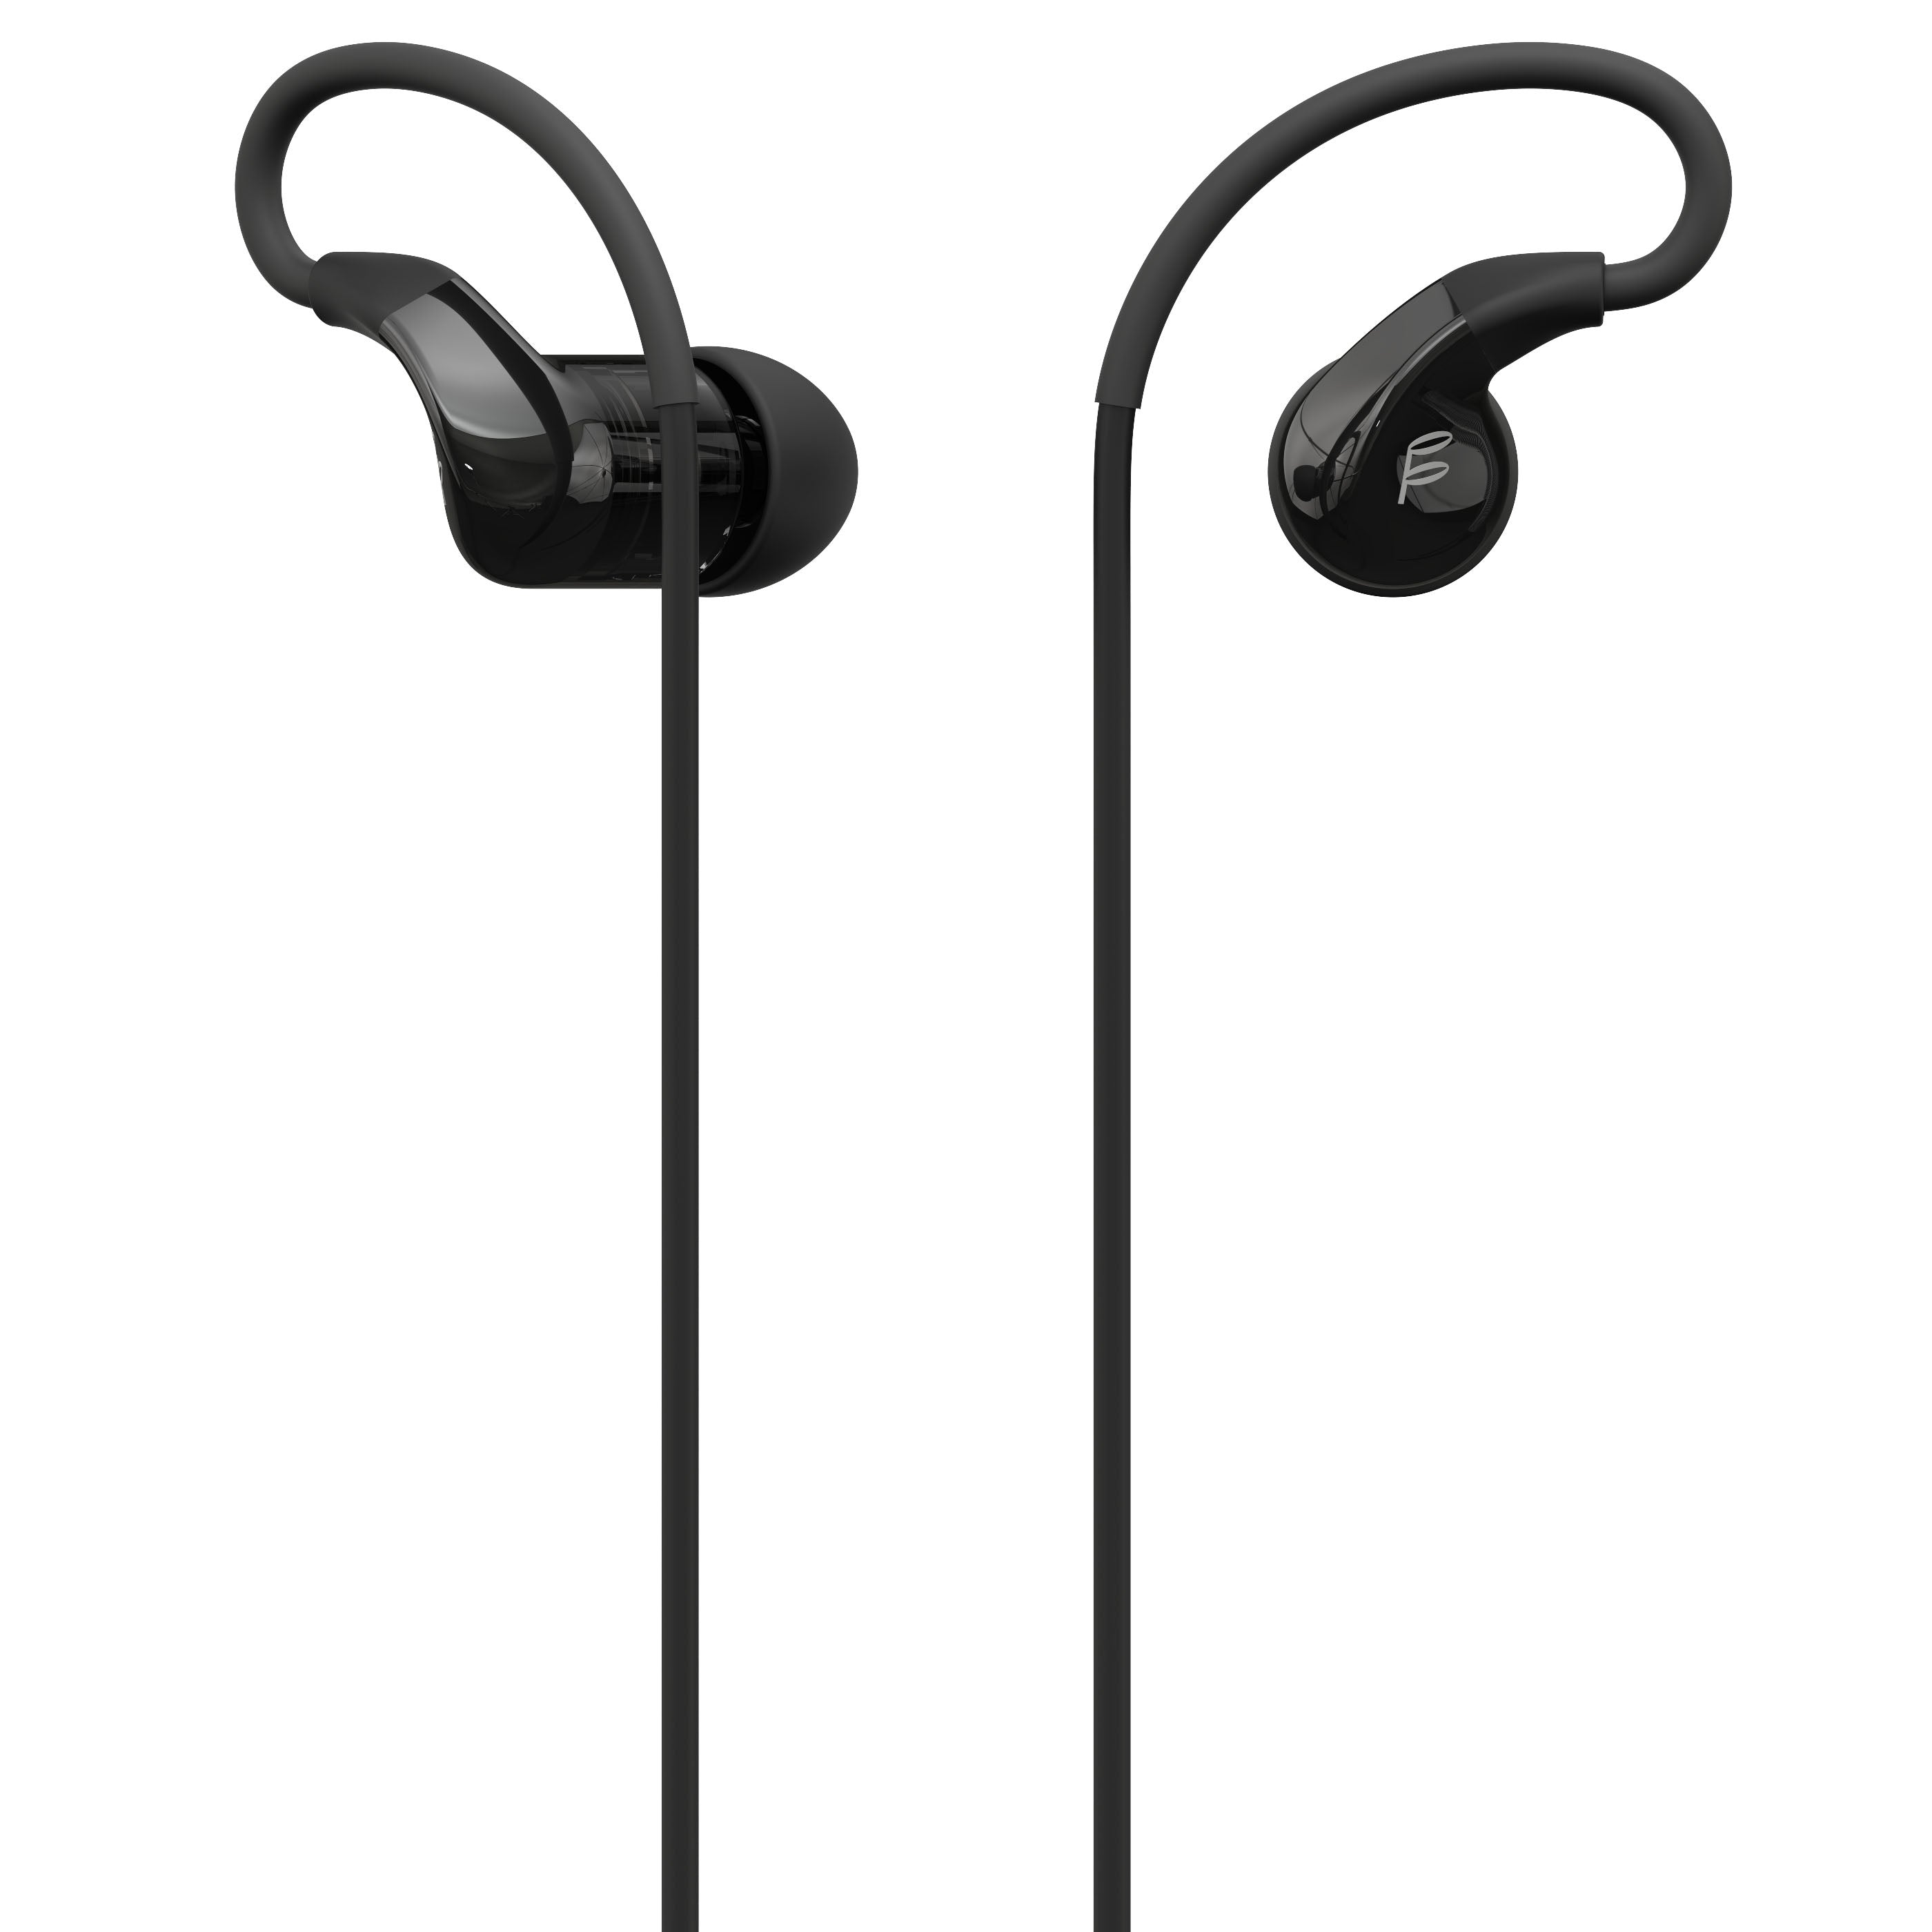 Buy FIDUE A71 Earphone at HiFiNage in India with warranty.